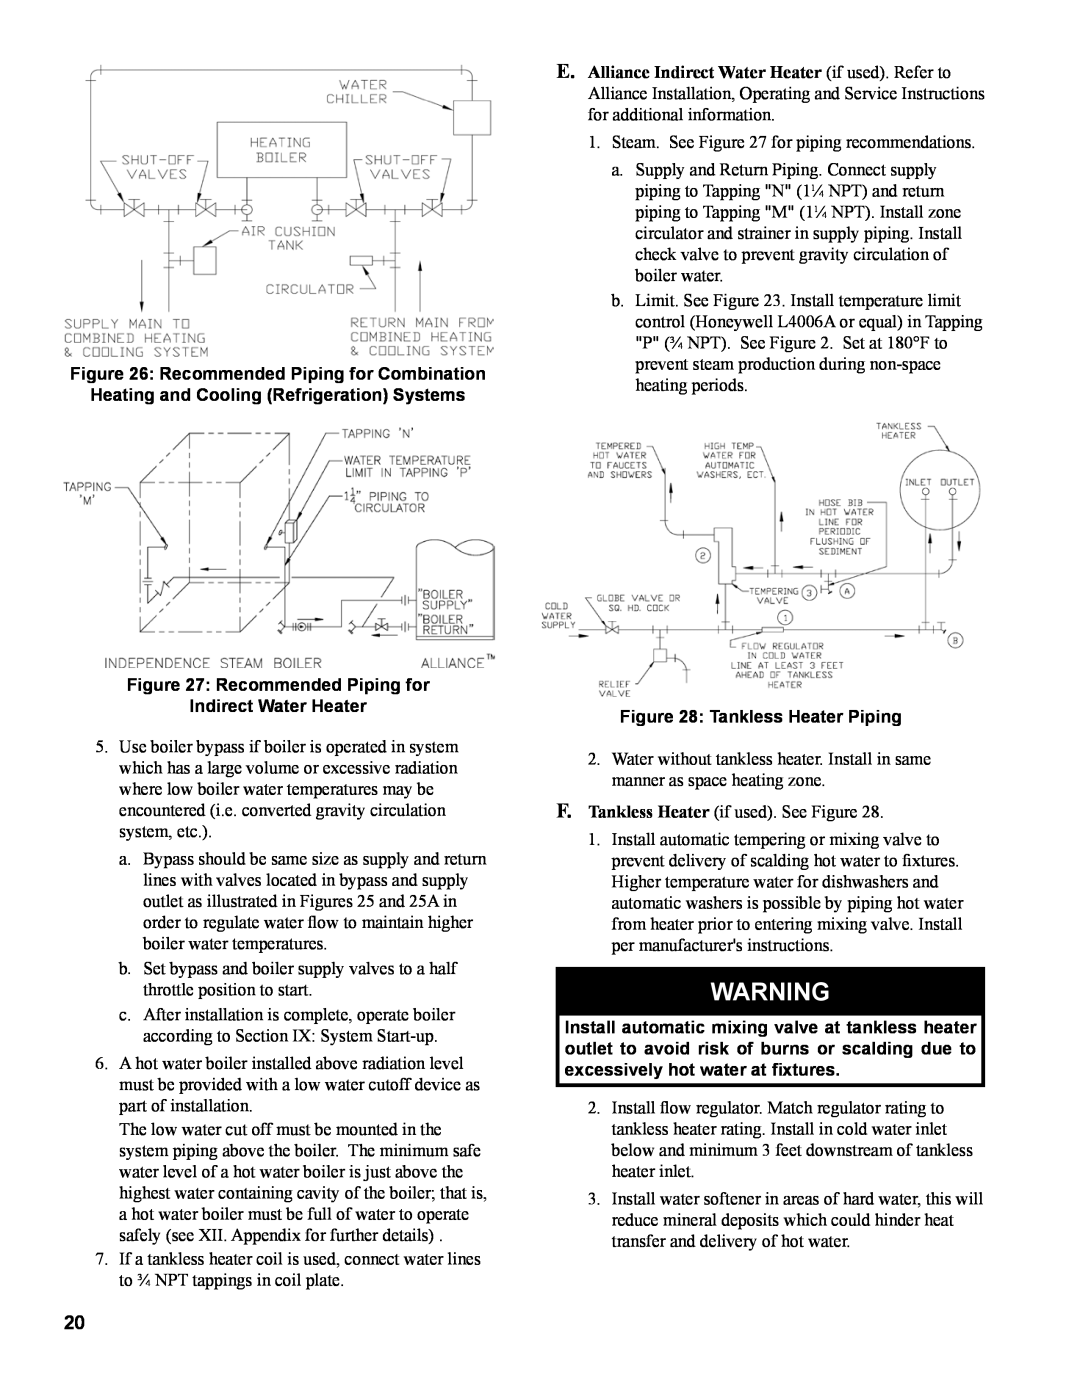 Burnham IN10 manual Recommended Piping for Indirect Water Heater, Tankless Heater Piping 